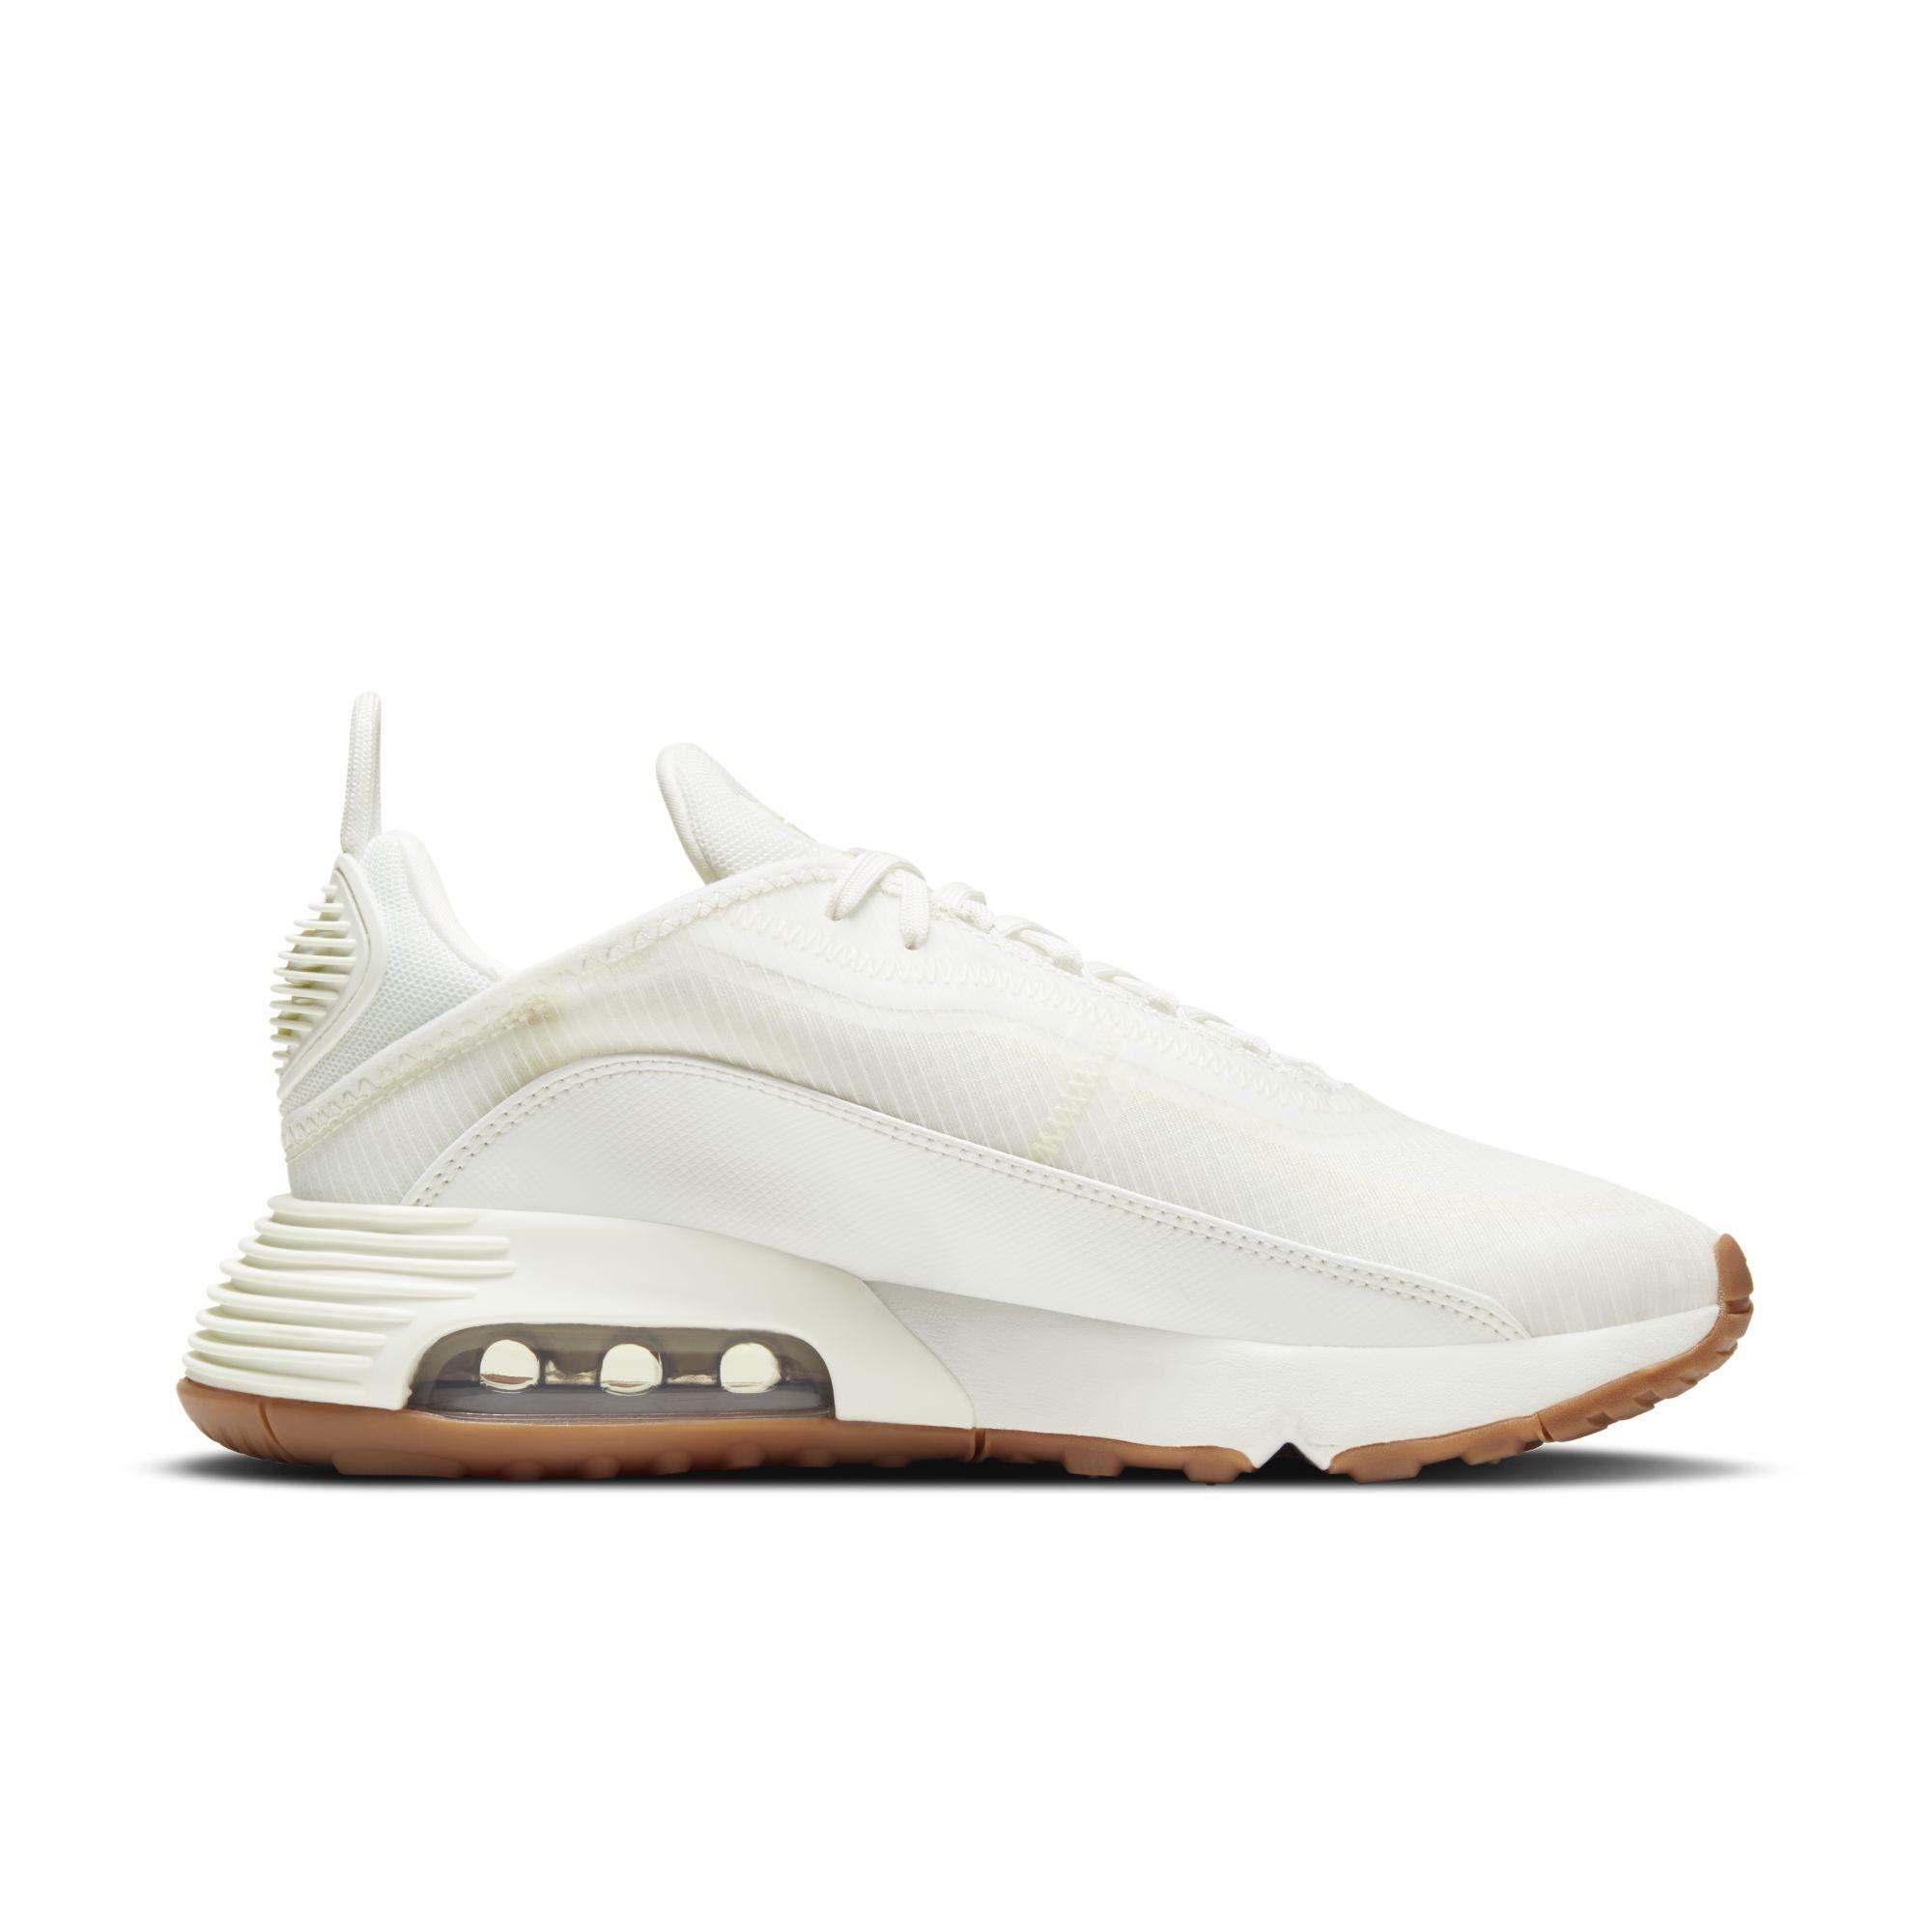 Nike Air Max 2090 Twist Shoes in White | Lyst